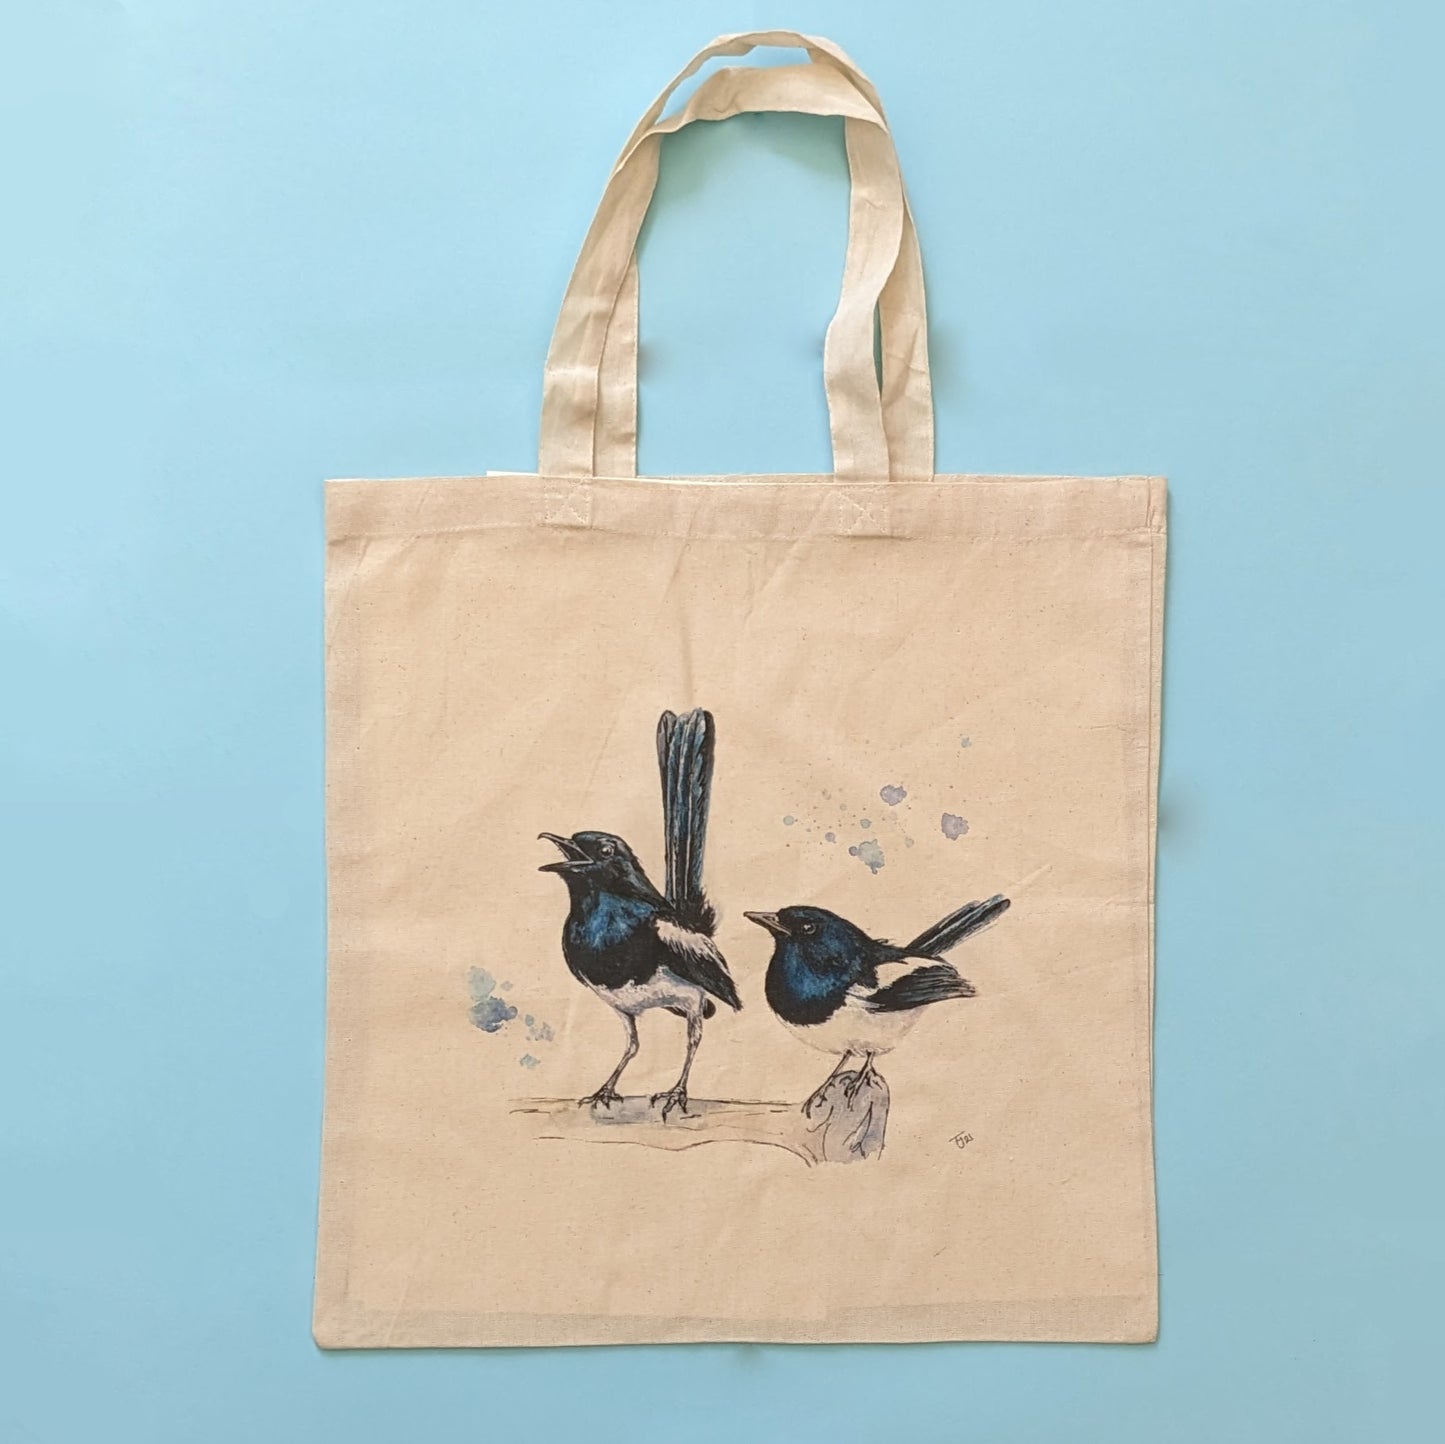 "Two for Joy" Tote Bag